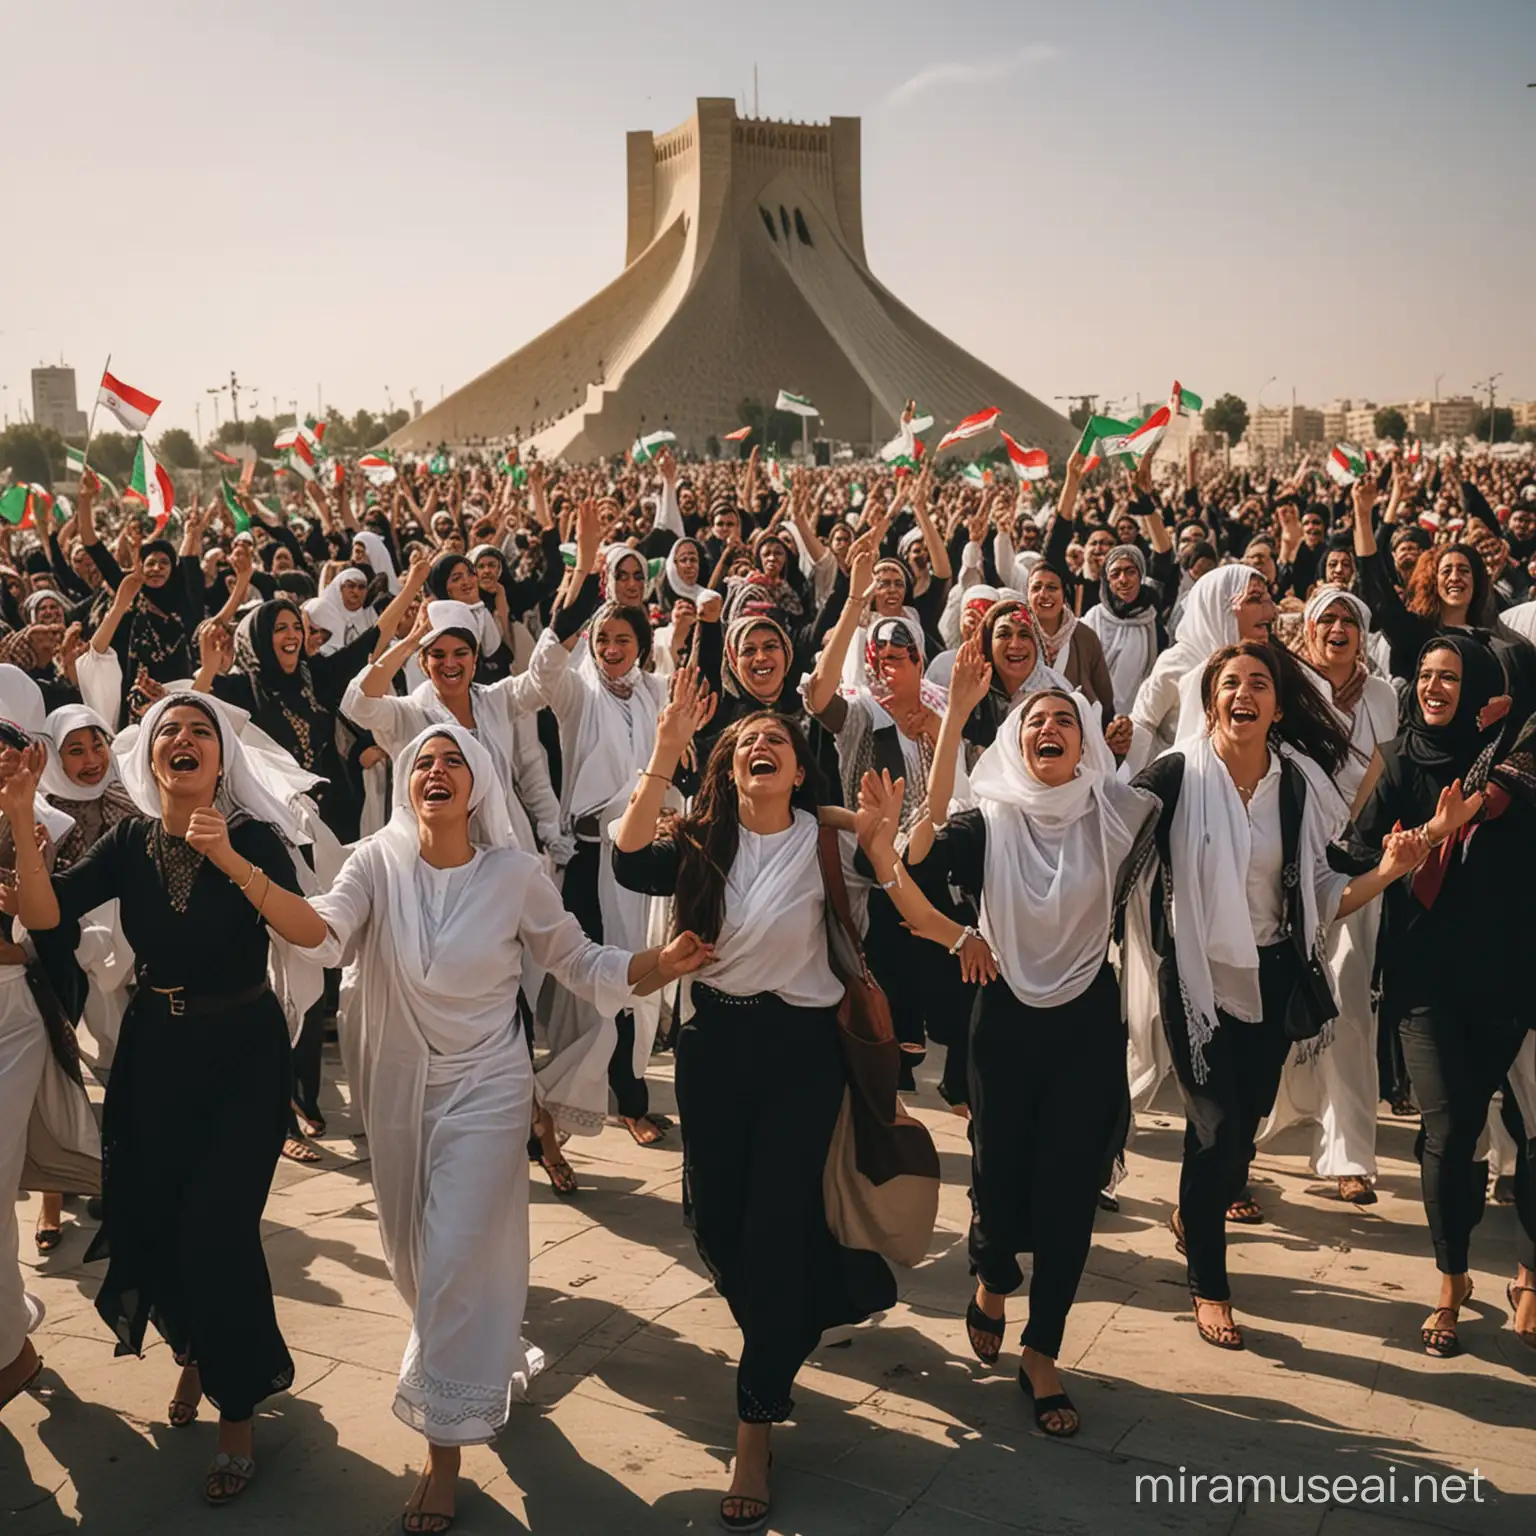 Iranian people celebration their freedom in the streets men and women are happy and dance together and tears from joy on their face 
Azadi Tower is behind them 
hair of the women are dancing in the wind 